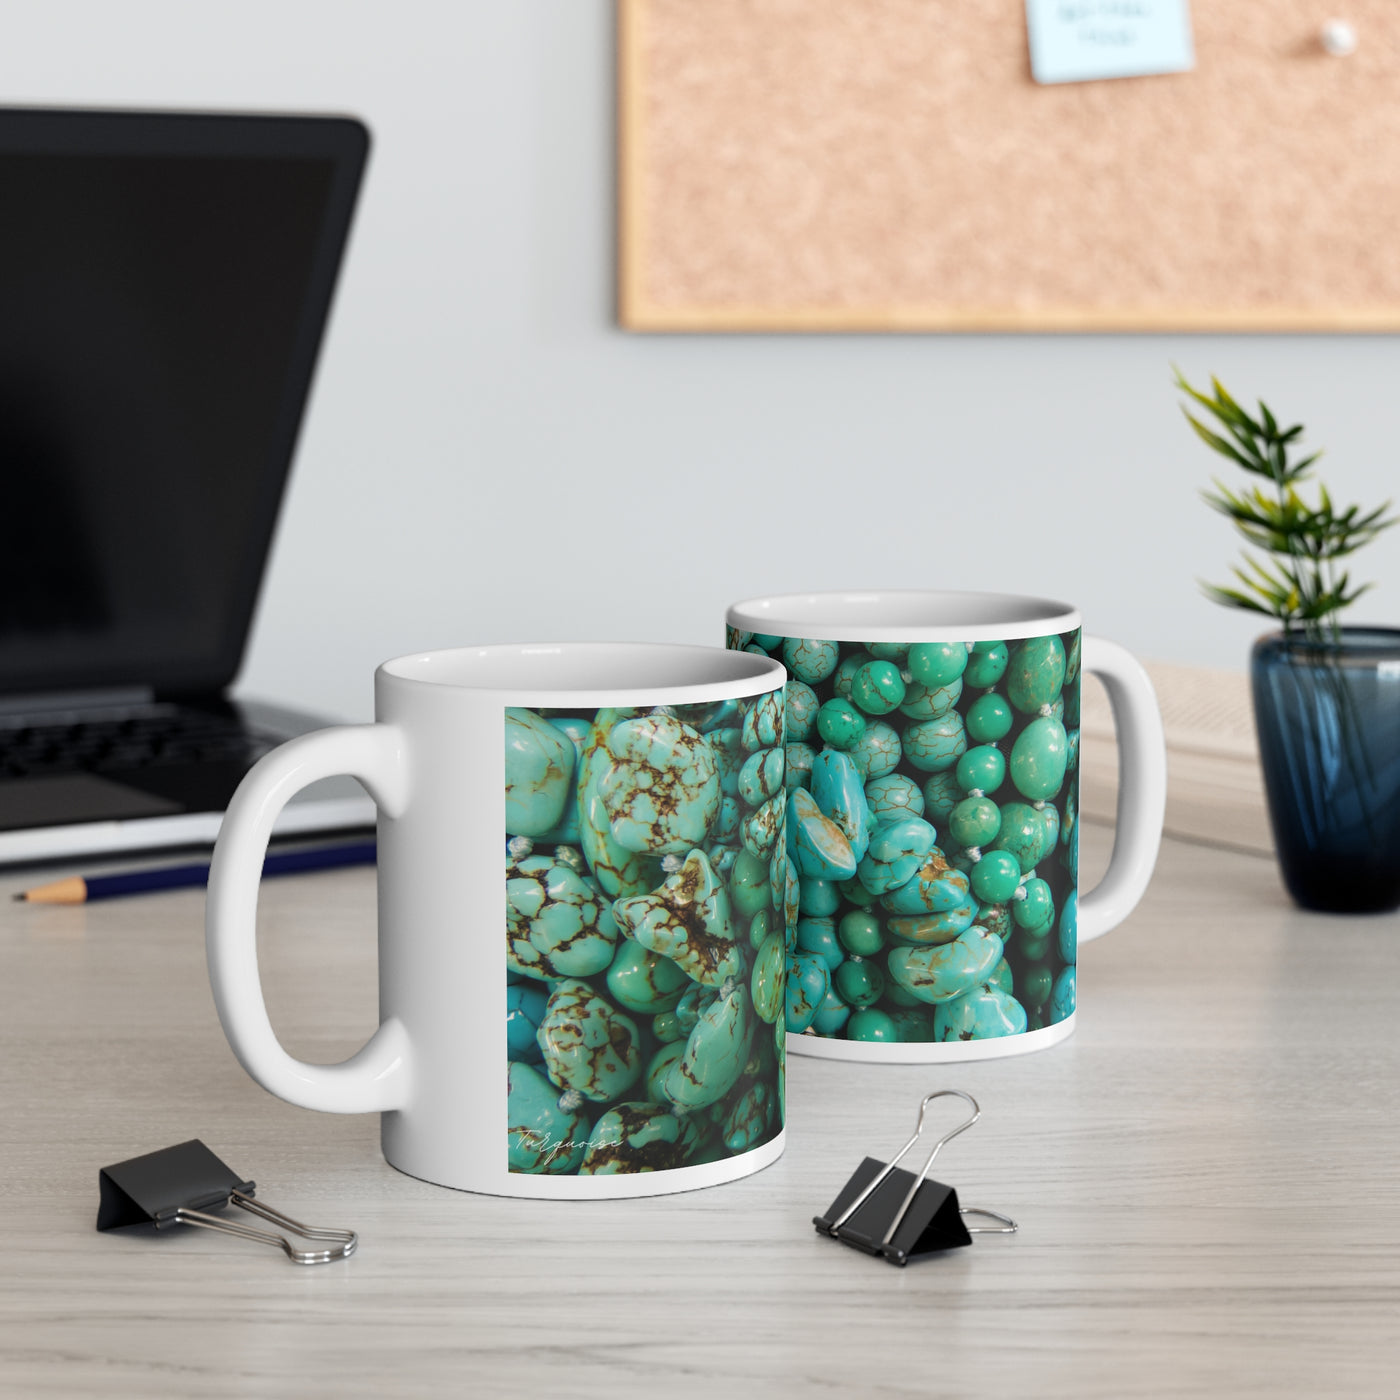 Boho Turquoise Stone Ceramic Mug - Crystals - Gemstones - Southwest Style Tea Cup, Perfect Gift for Crystal Lovers and Rockhounds